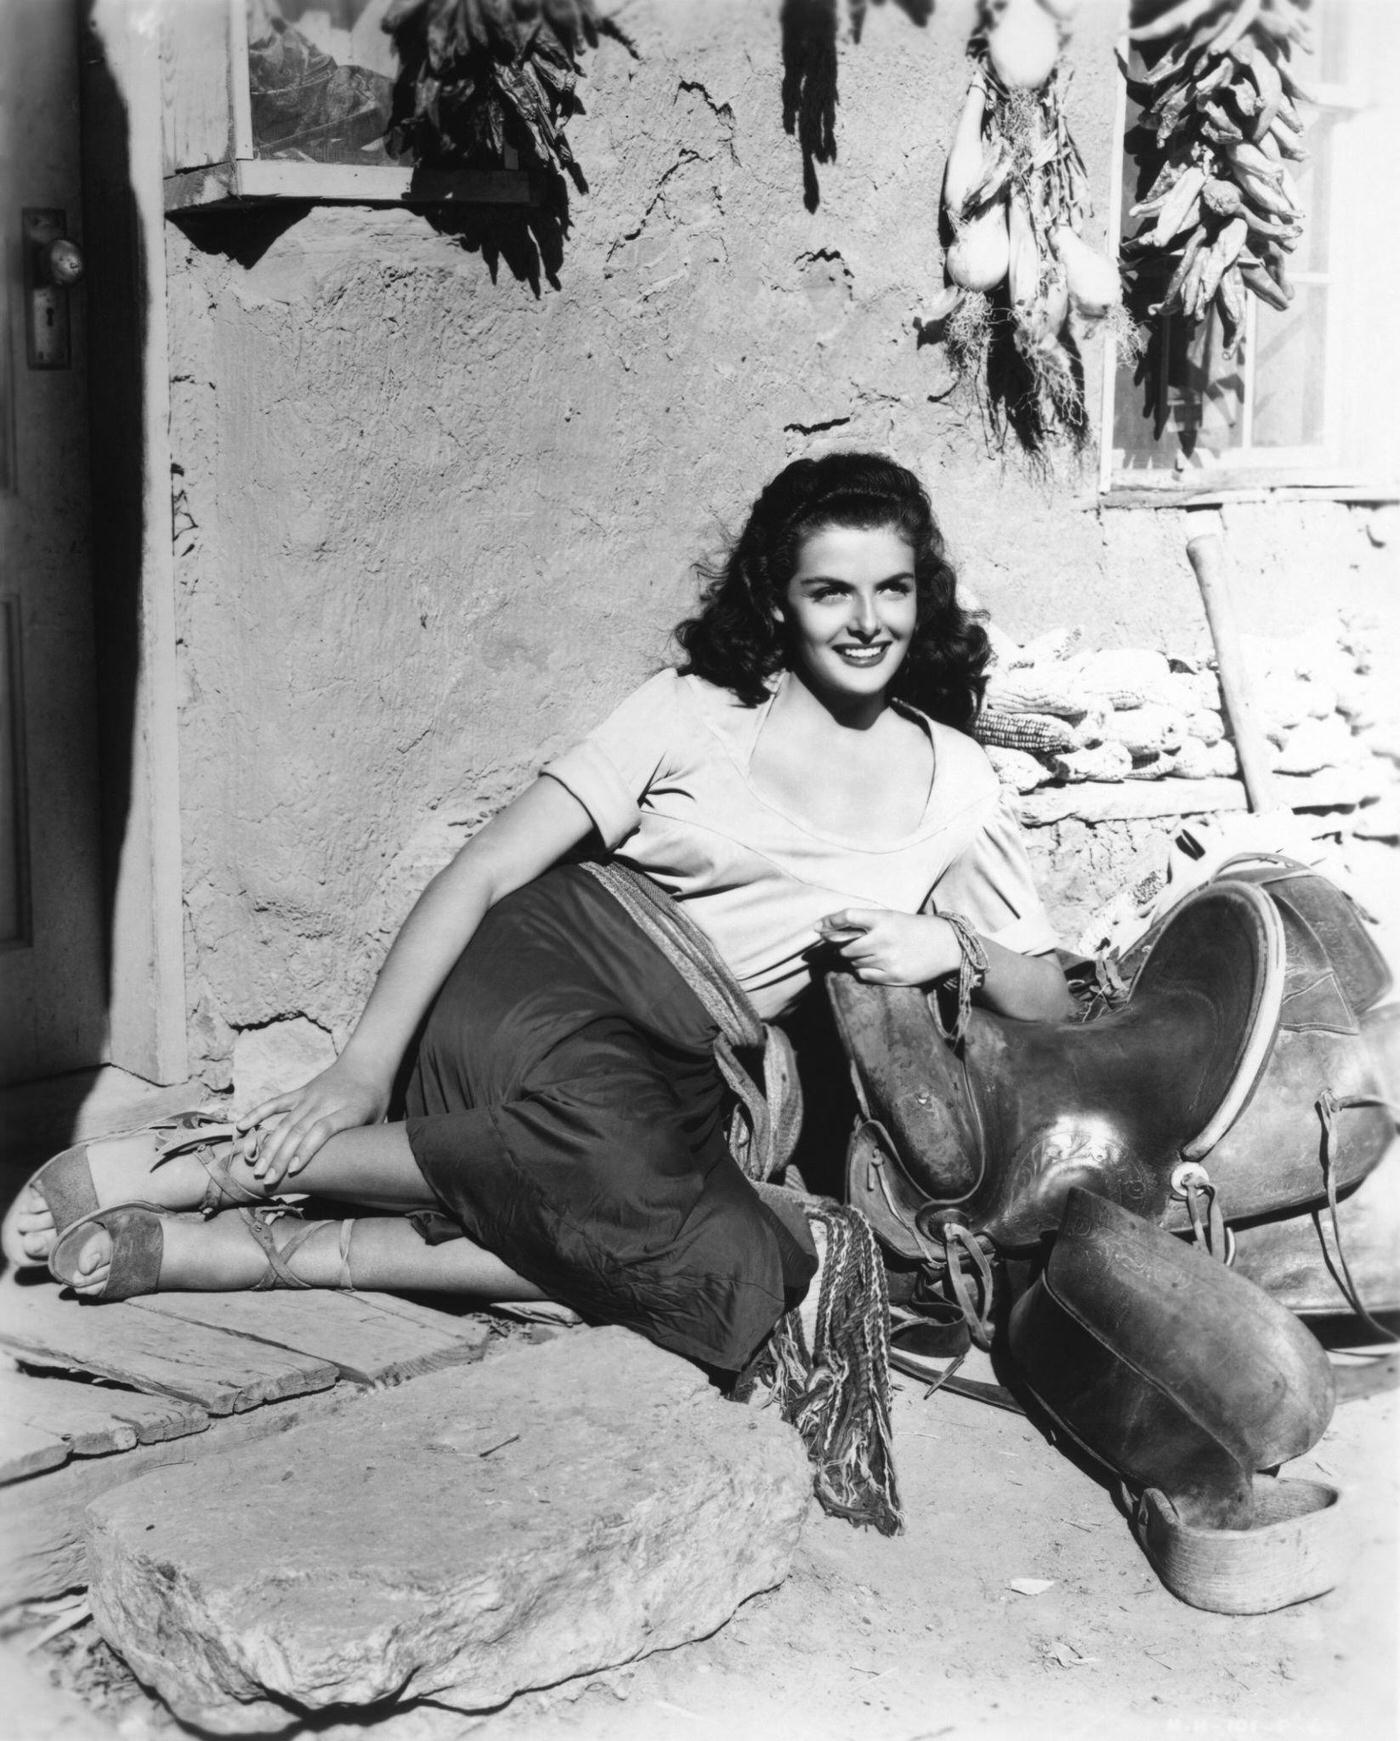 Jane Russell in the movie "The Outlaw", 1943